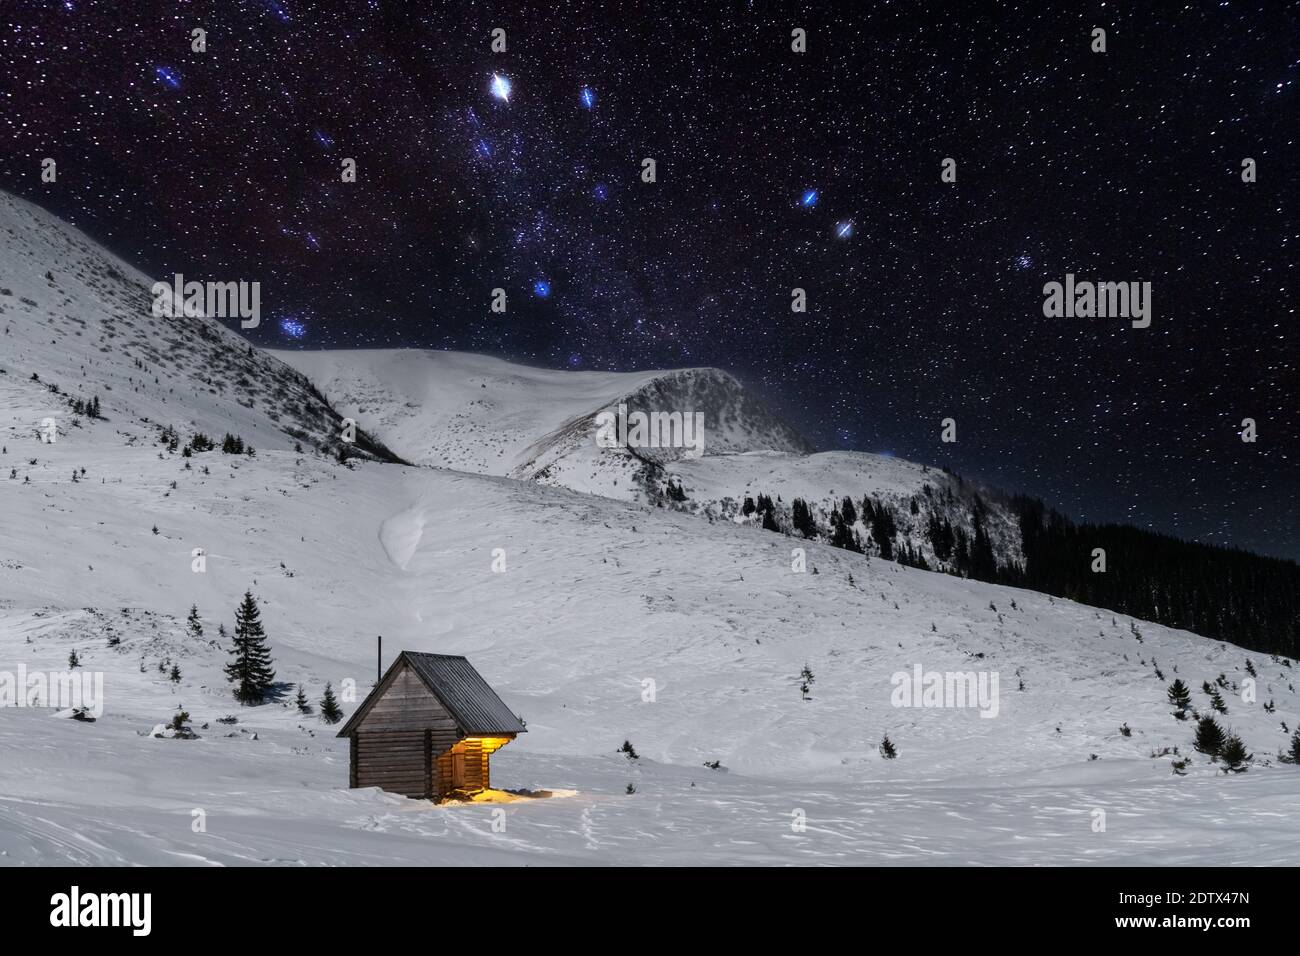 Fantastic winter landscape with wooden house in snowy mountains. Starry sky with Milky Way and snow covered hut. Christmas holiday and winter vacations concept Stock Photo